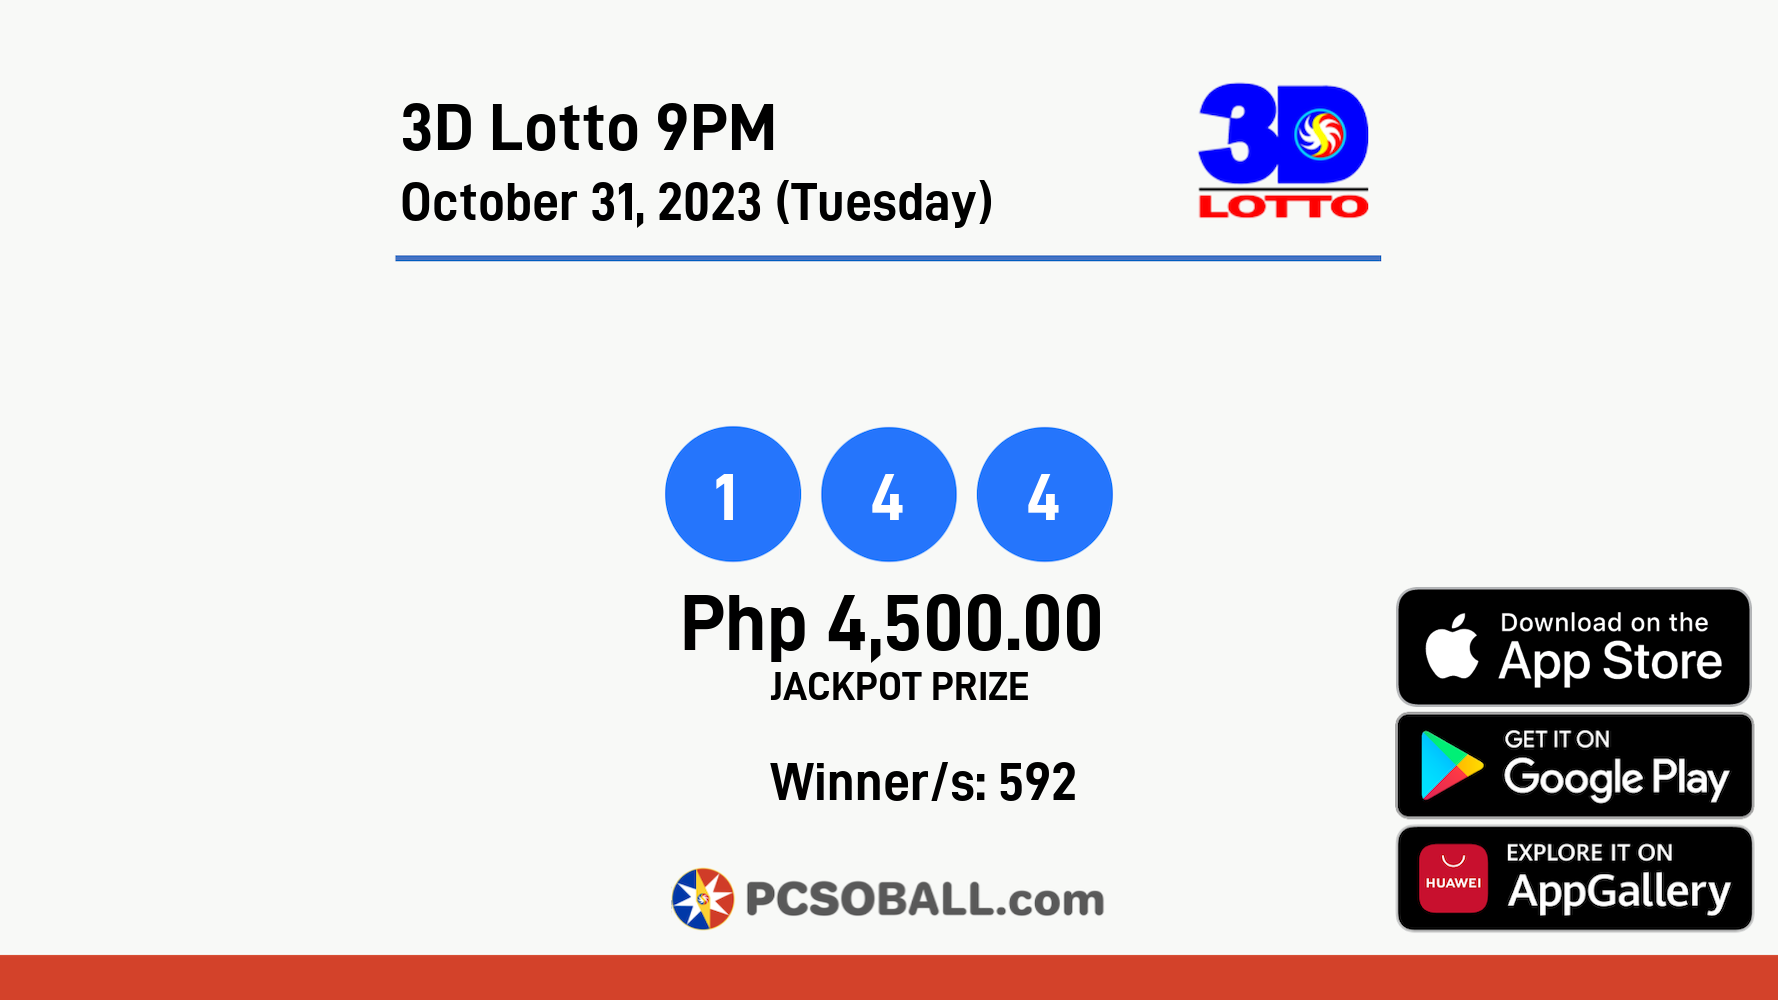 3D Lotto 9PM October 31, 2023 (Tuesday) Result